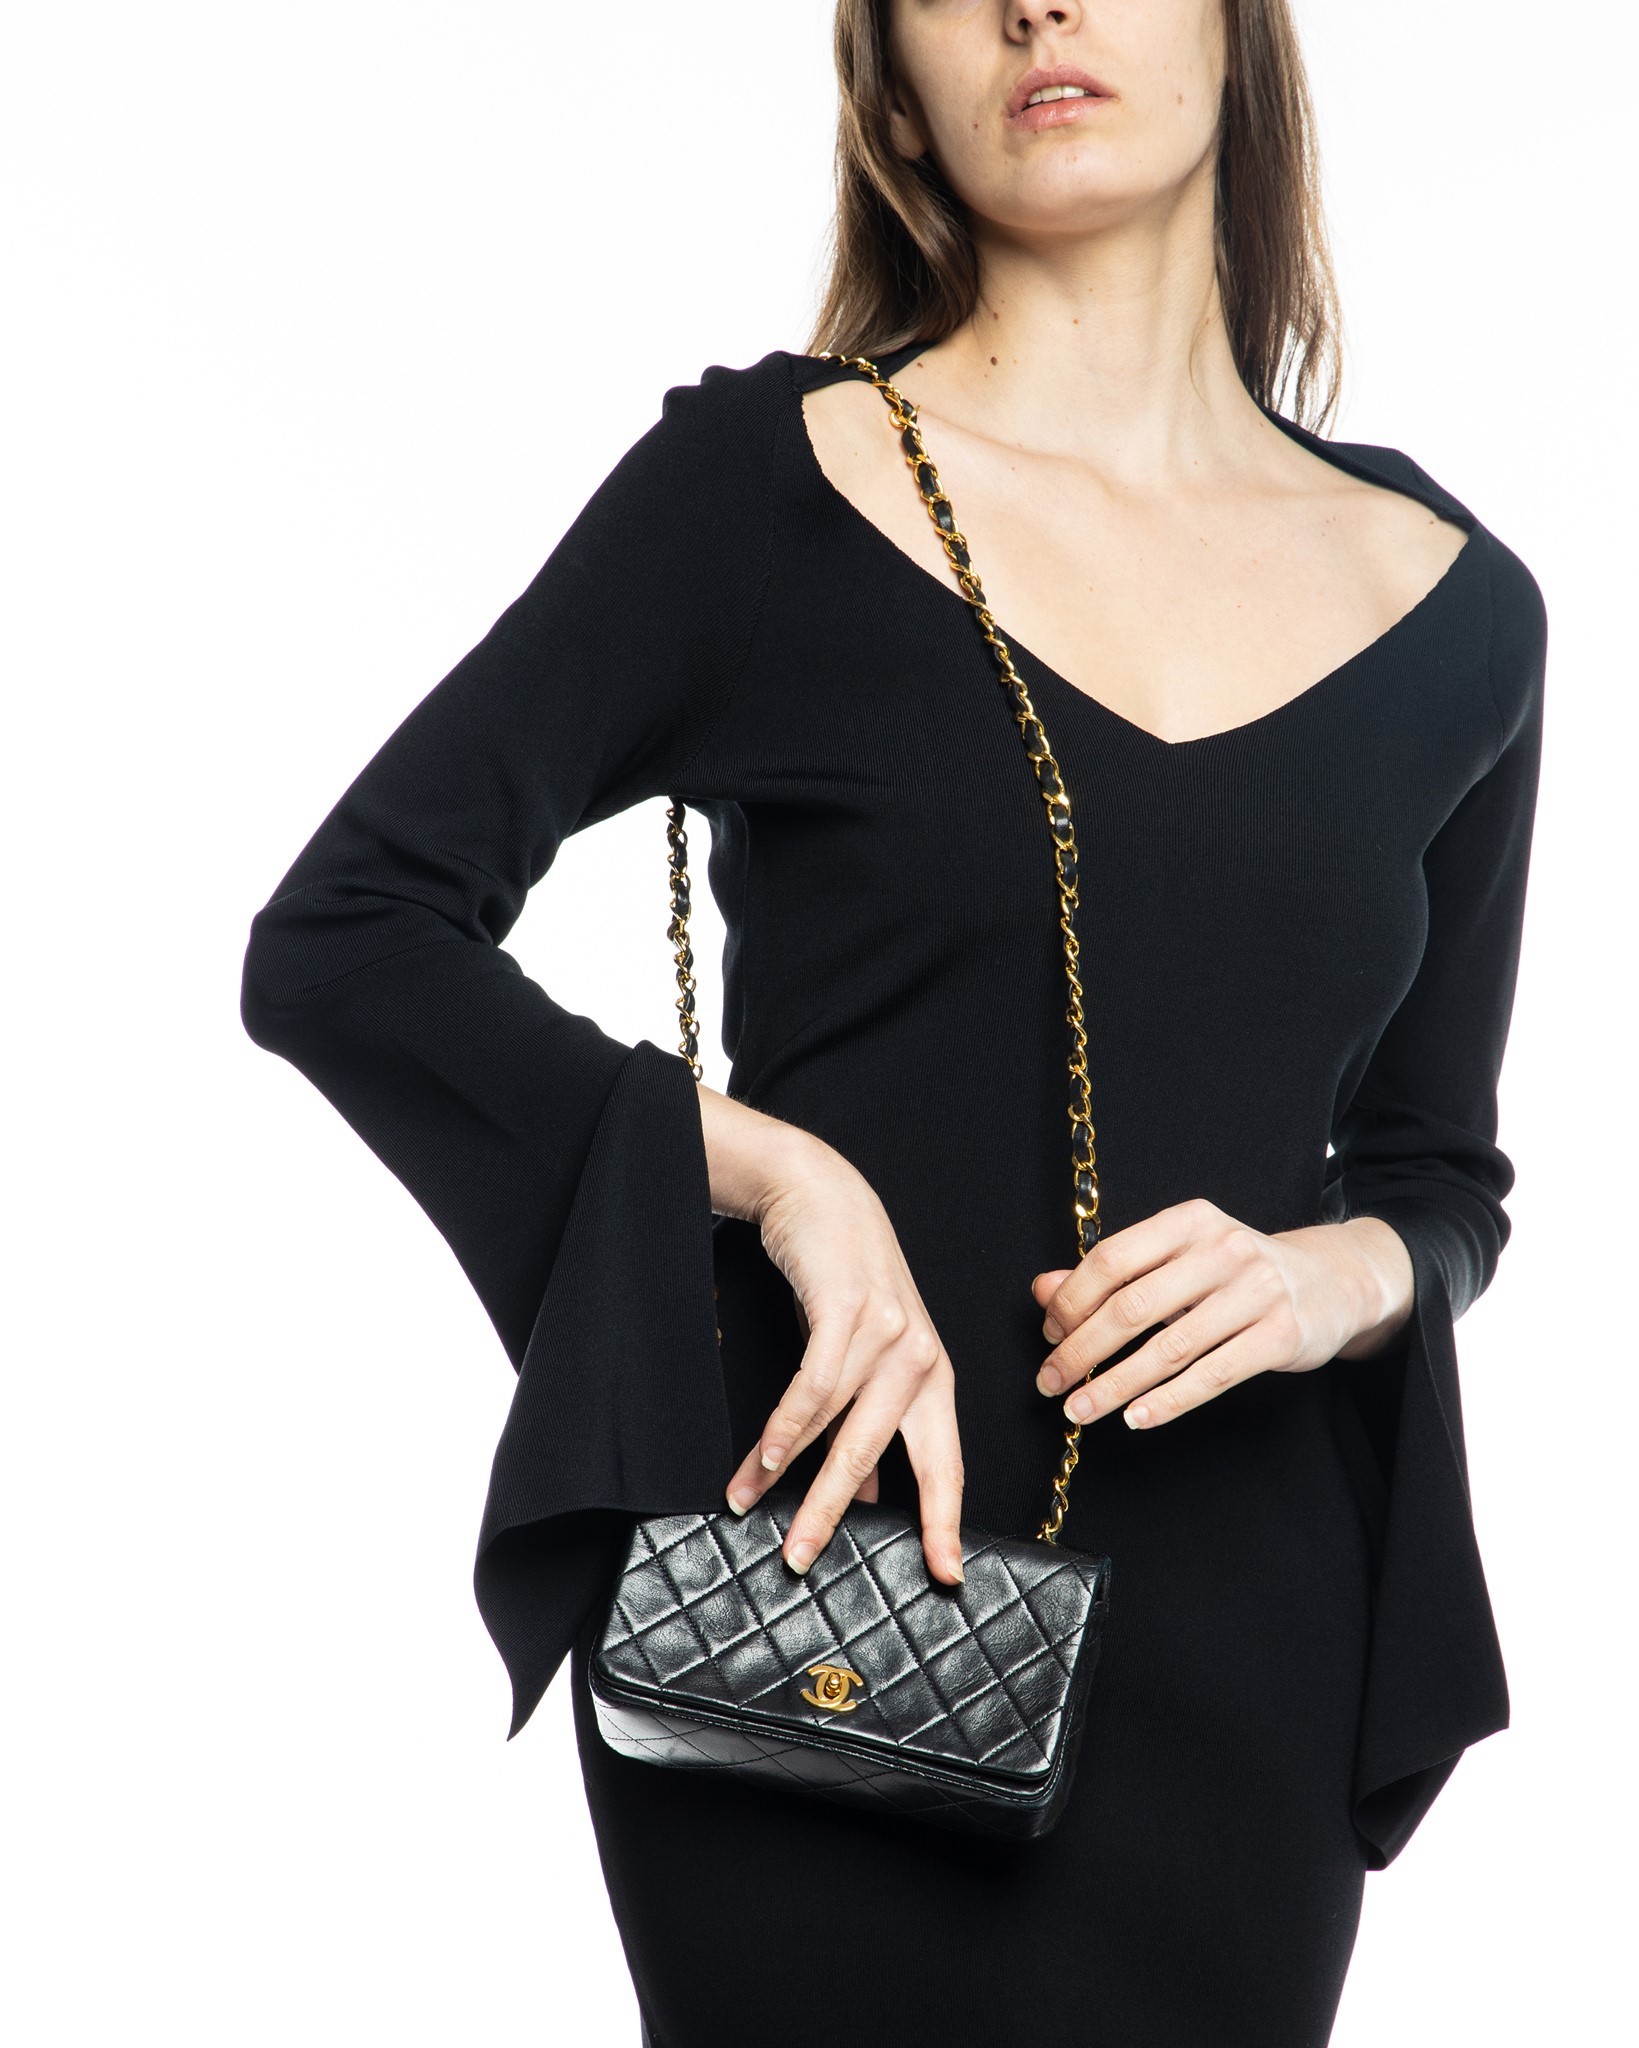 Nass boutique is a multi-brand boutique curating women's clothing and accessoriesVINTAGE  CHANEL MINI QUILTED SHOULDER BAG